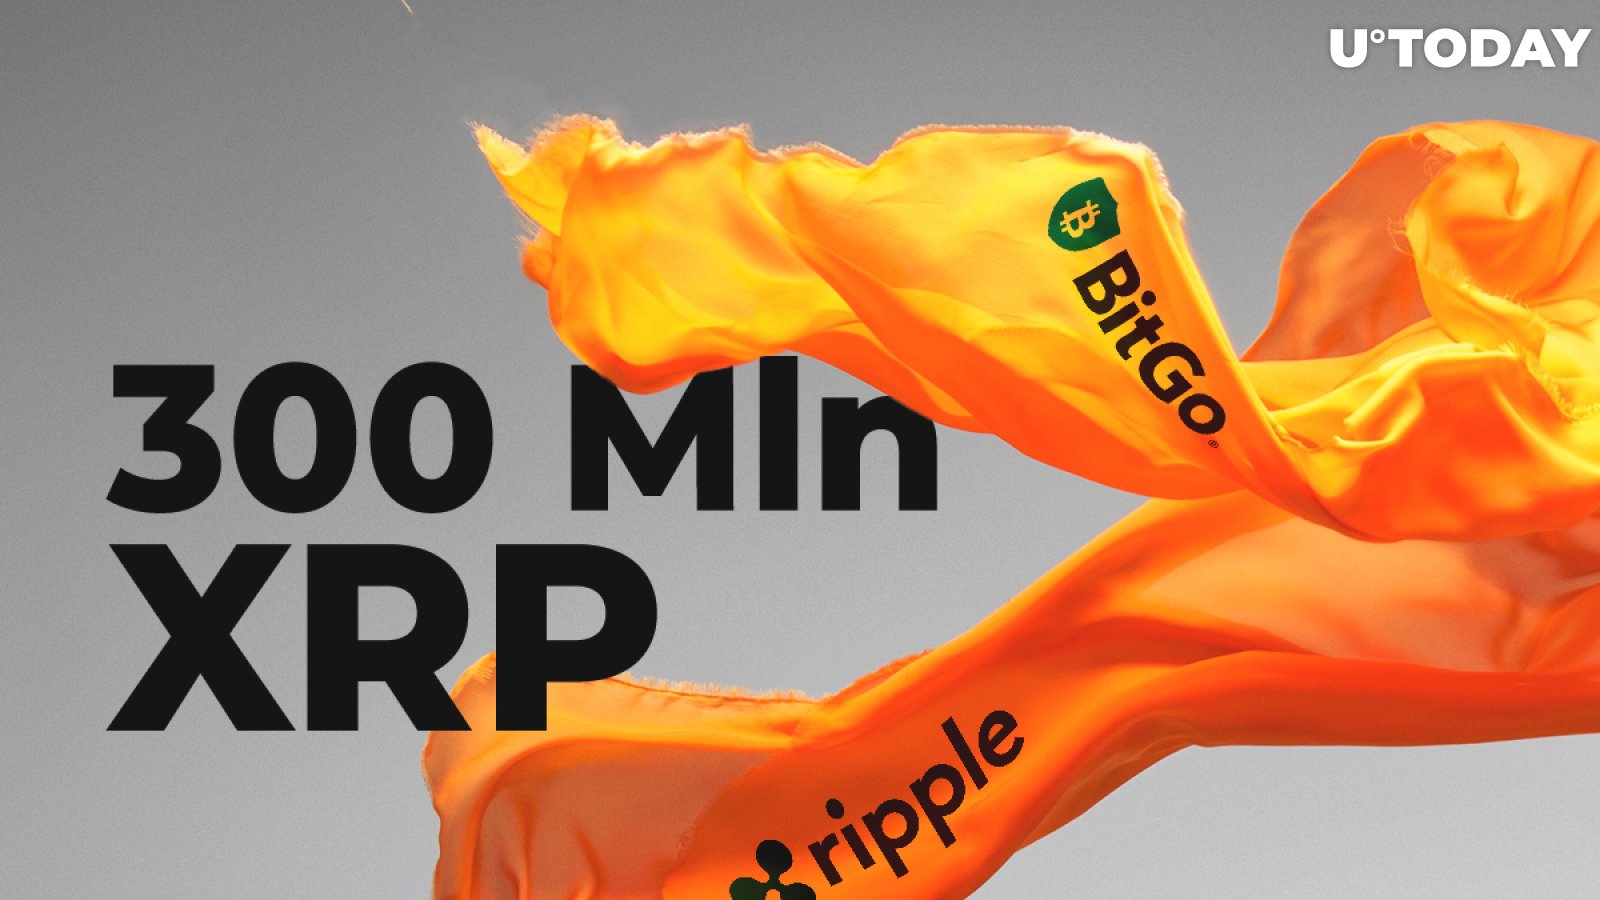 Ripple and Custodial Service BitGo Shift Almost 300 Mln XRP During Last 20 Hours